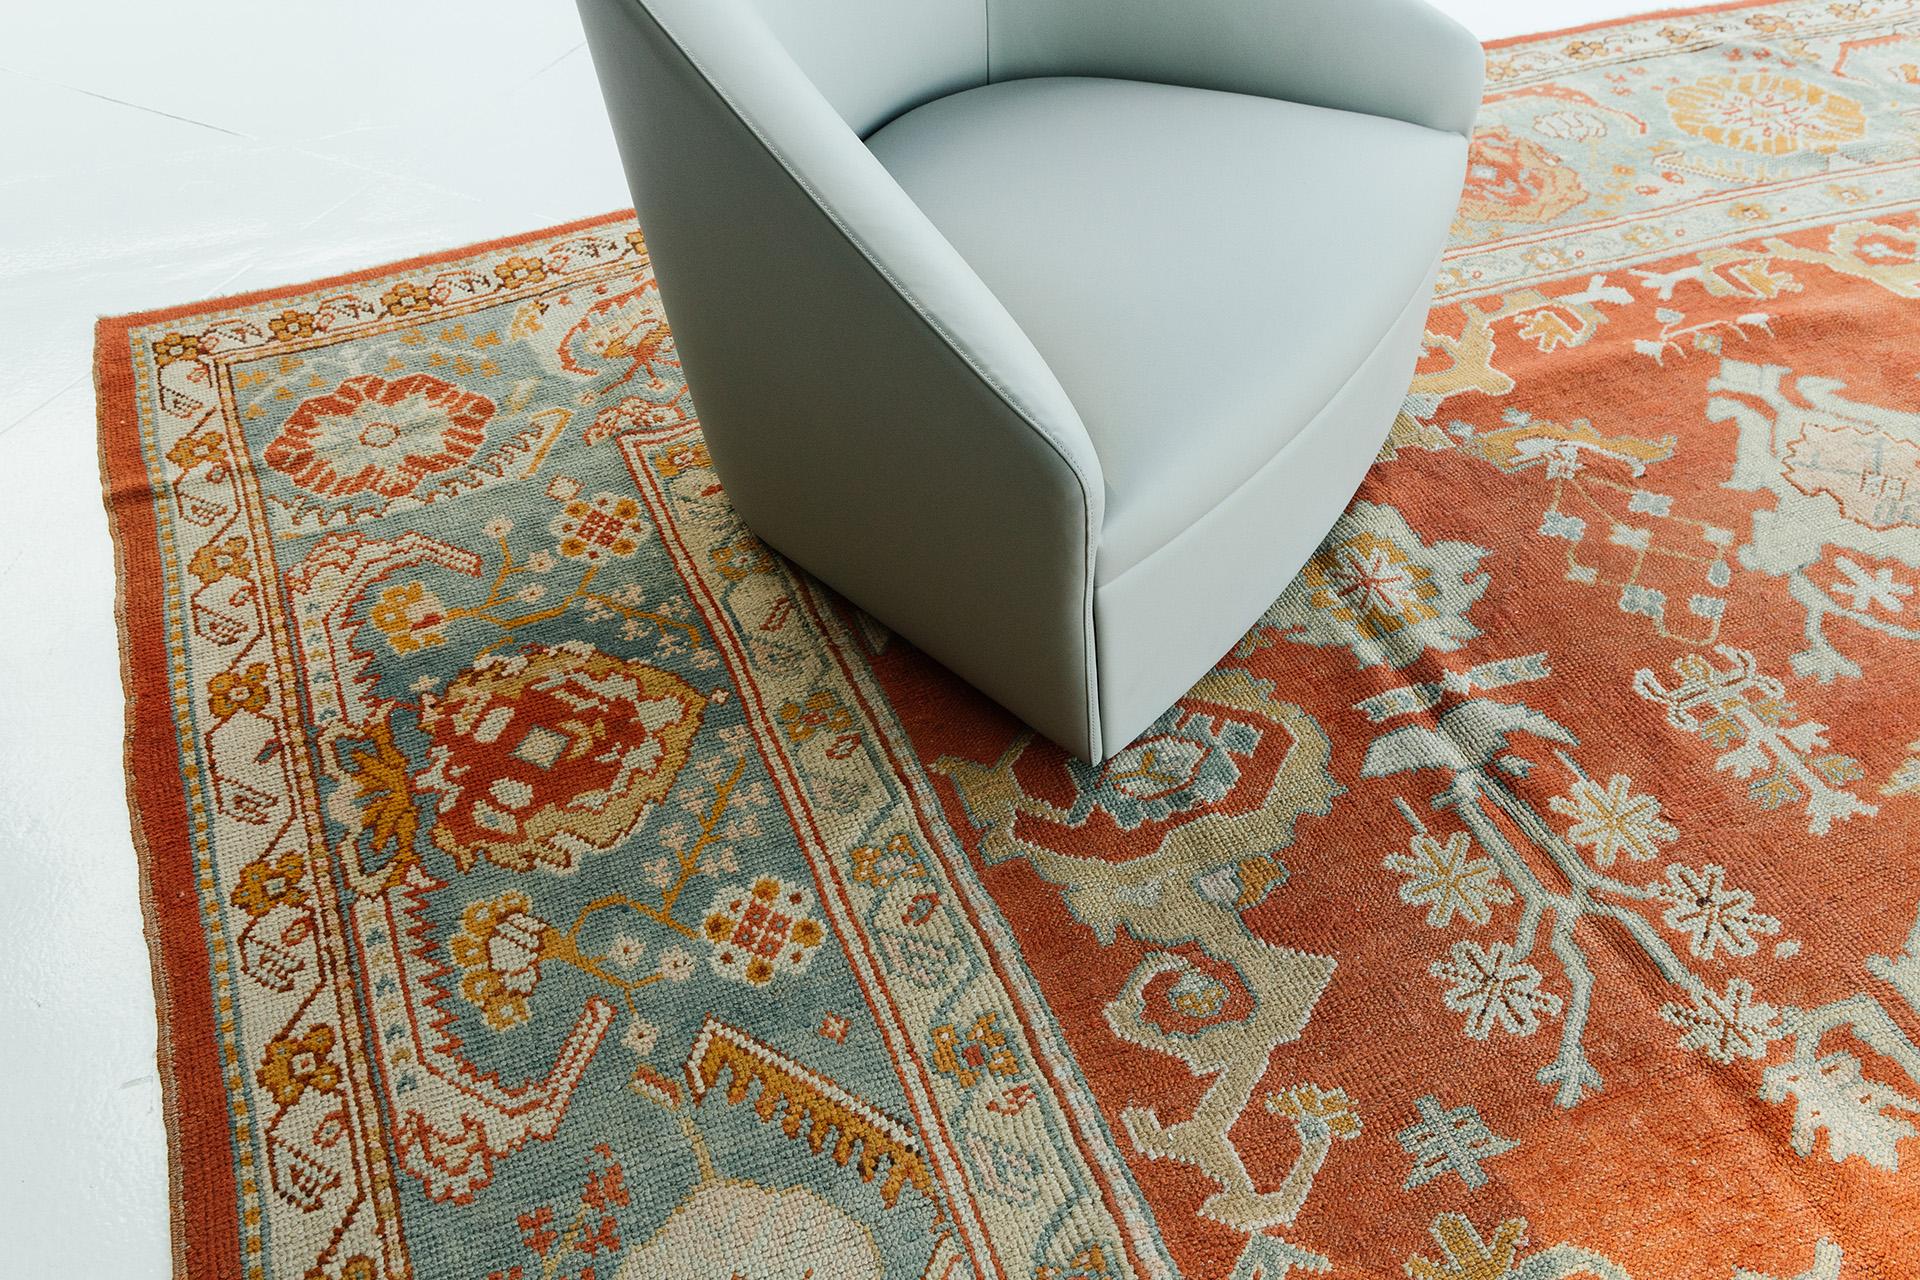 Our antique Turkish Oushak rug is beautifully constructed using the pile weave method out of high quality wool. The beautiful rust hue is featured centrally, and no picture can capture its magnificence. Use it in any application, whether it's the